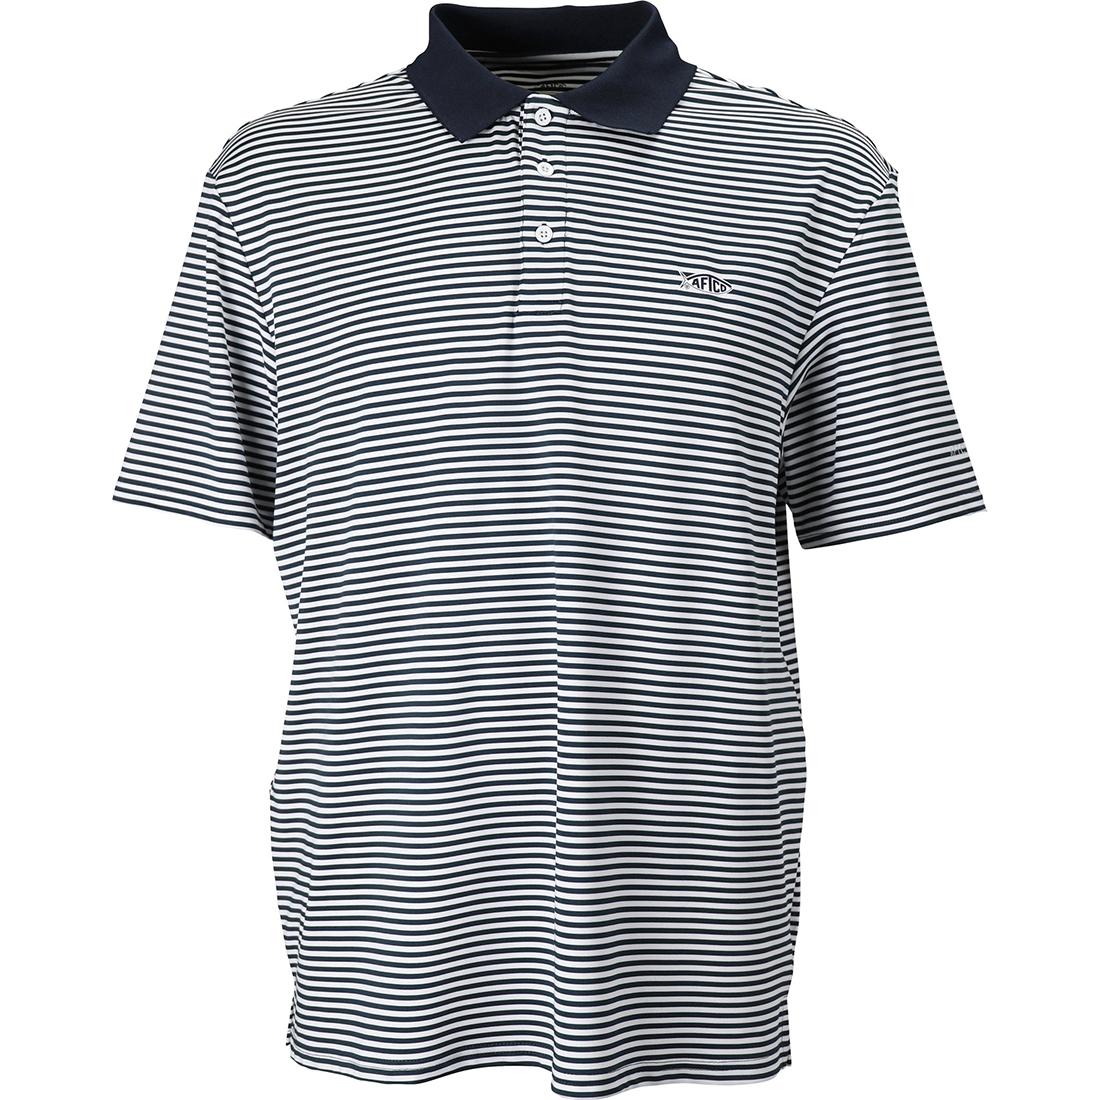 SHIRT REPLAY POLO SS Aftco